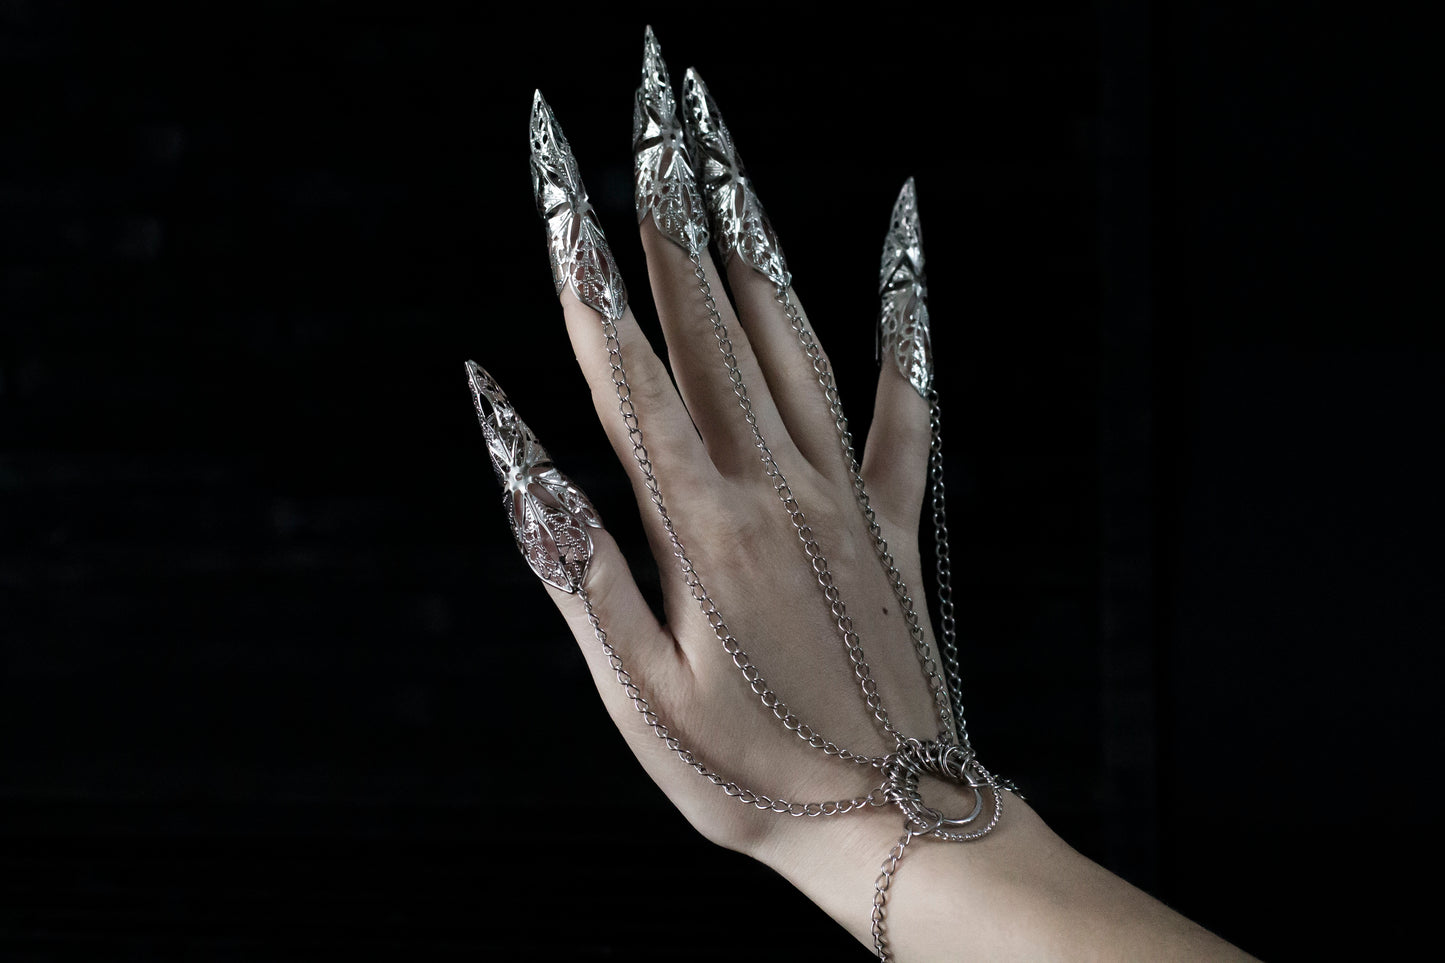 A hand adorned with Myril Jewels' hand chain bracelet with silver claws, reflecting a darkly opulent neo-goth style. This captivating piece is perfect for those who favor gothic-chic jewelry, making it an ideal choice for witchcore looks, rave parties, or as a daring gift for the bold at heart.